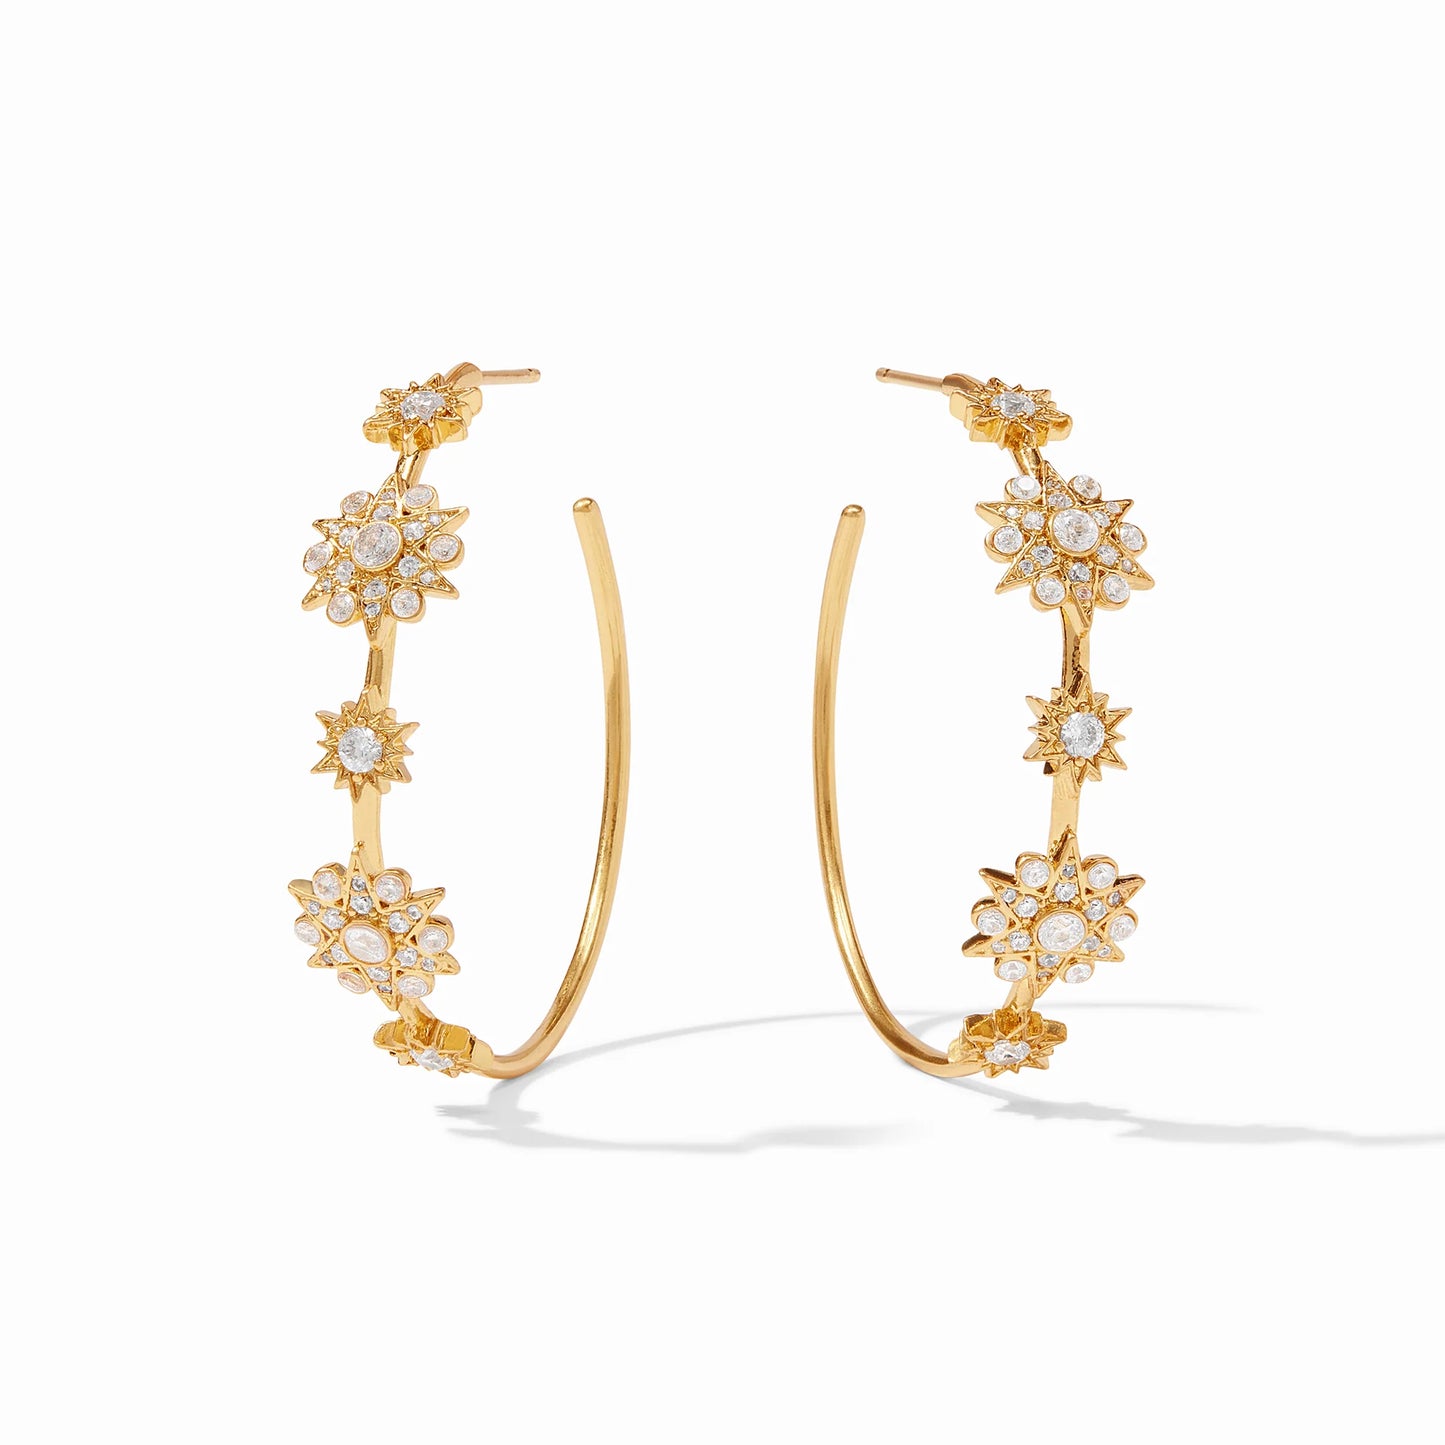 Celeste Hoop by Julie Vos features a constellation of cubic zirconia stars which dot outer ridge of slim hoops, Medium 1.2 inch diameter 24K gold plate. Shop at The Painted Cottage an Annapolis Boutique.